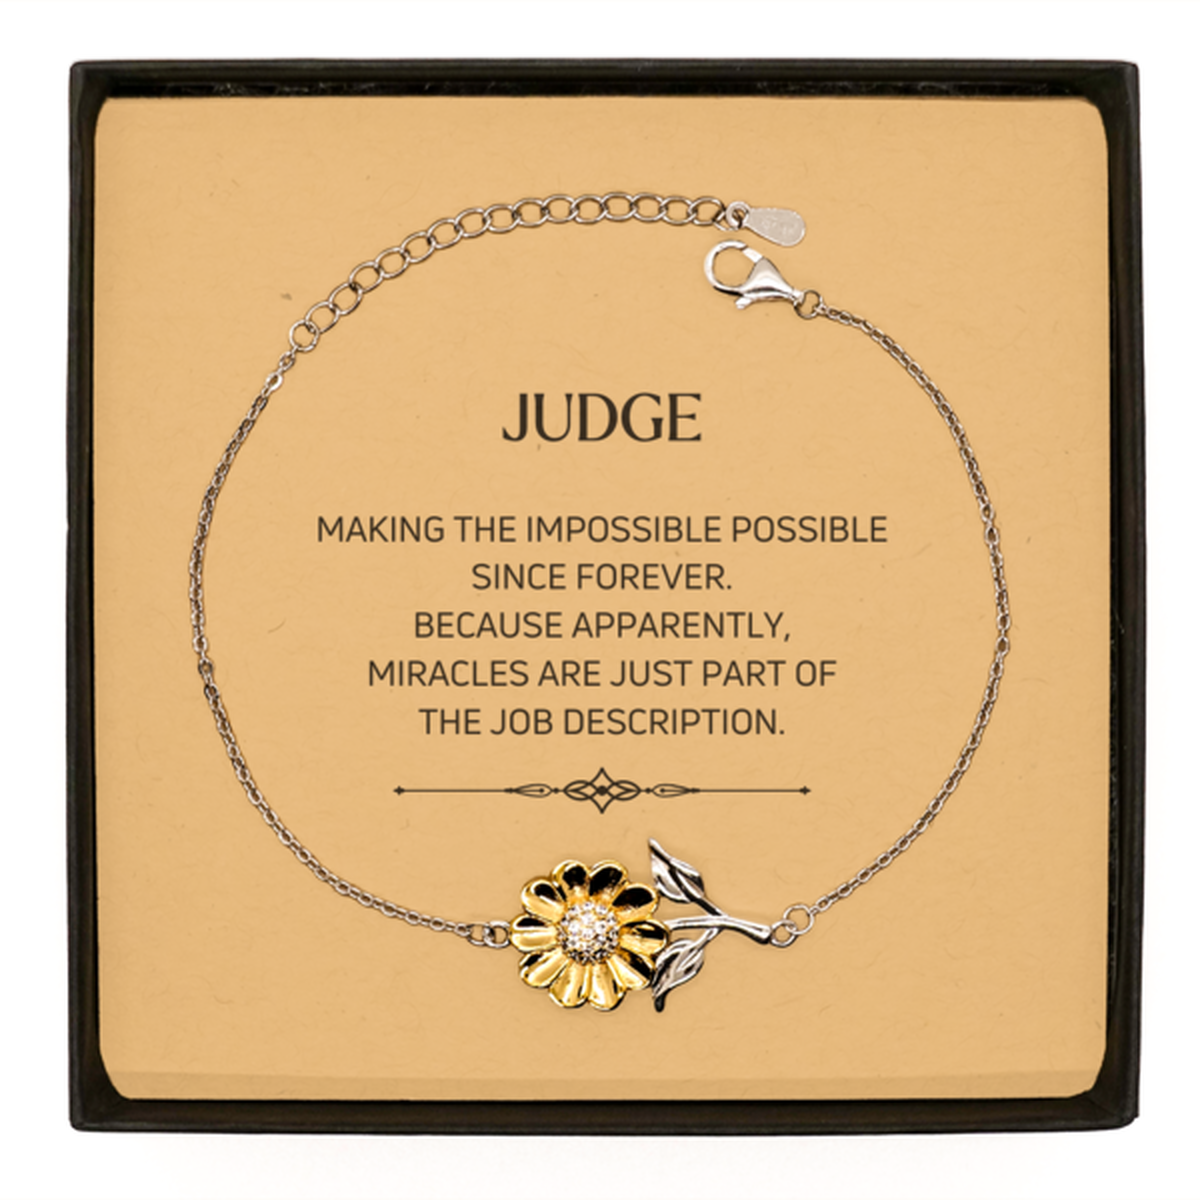 Funny Judge Gifts, Miracles are just part of the job description, Inspirational Birthday Sunflower Bracelet For Judge, Men, Women, Coworkers, Friends, Boss